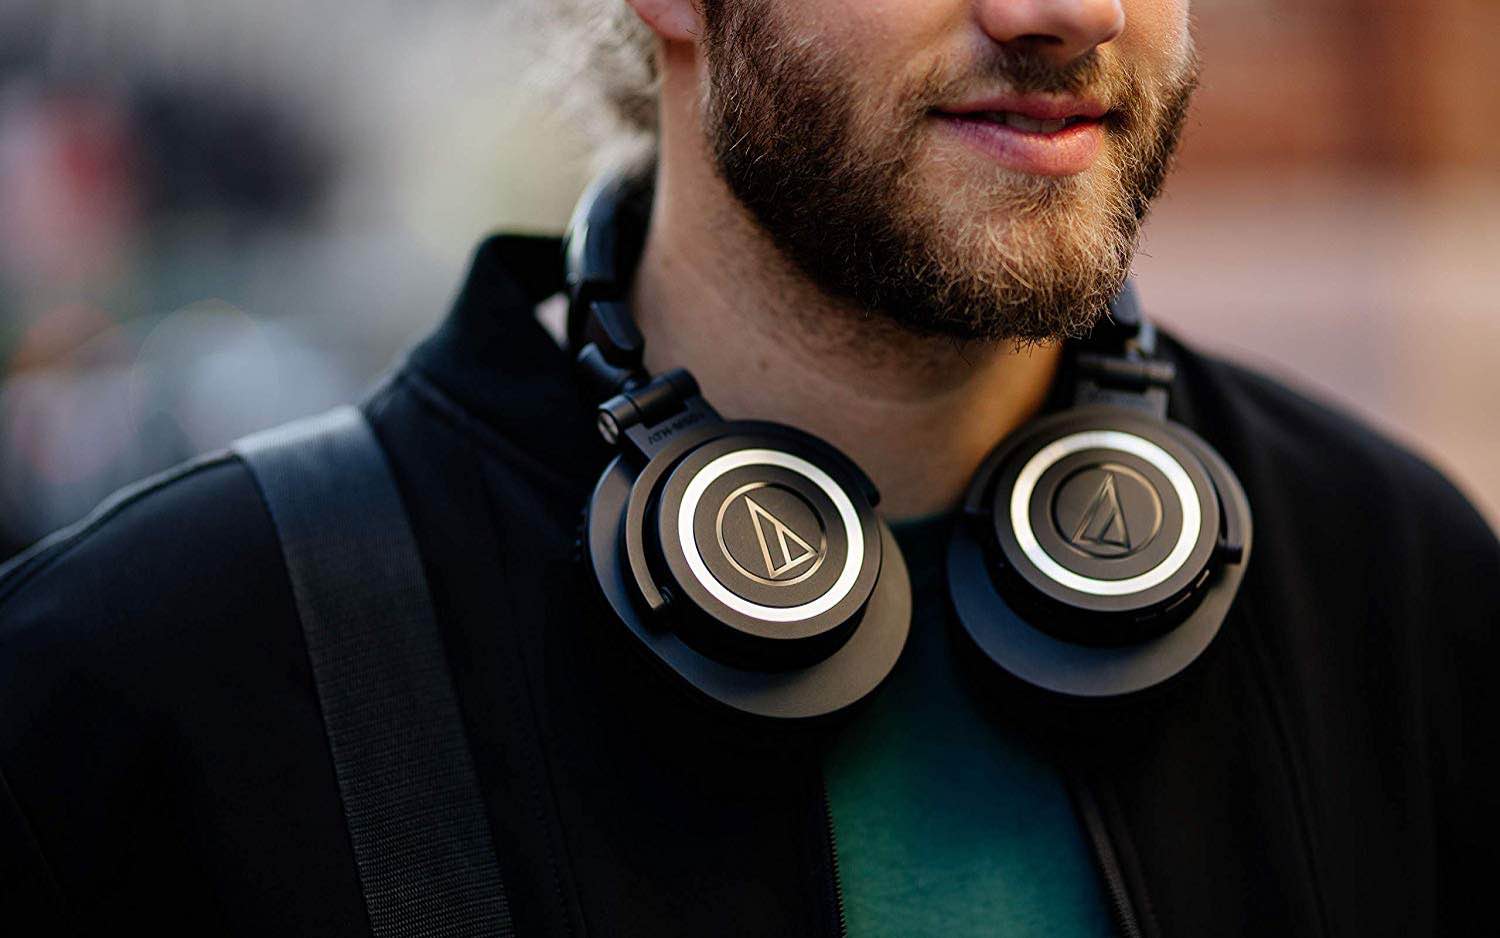 Ours discord passenger Audio-Technica ATH-M50xBT Review: Great Wireless Headphones on the Cheap |  Tom's Guide